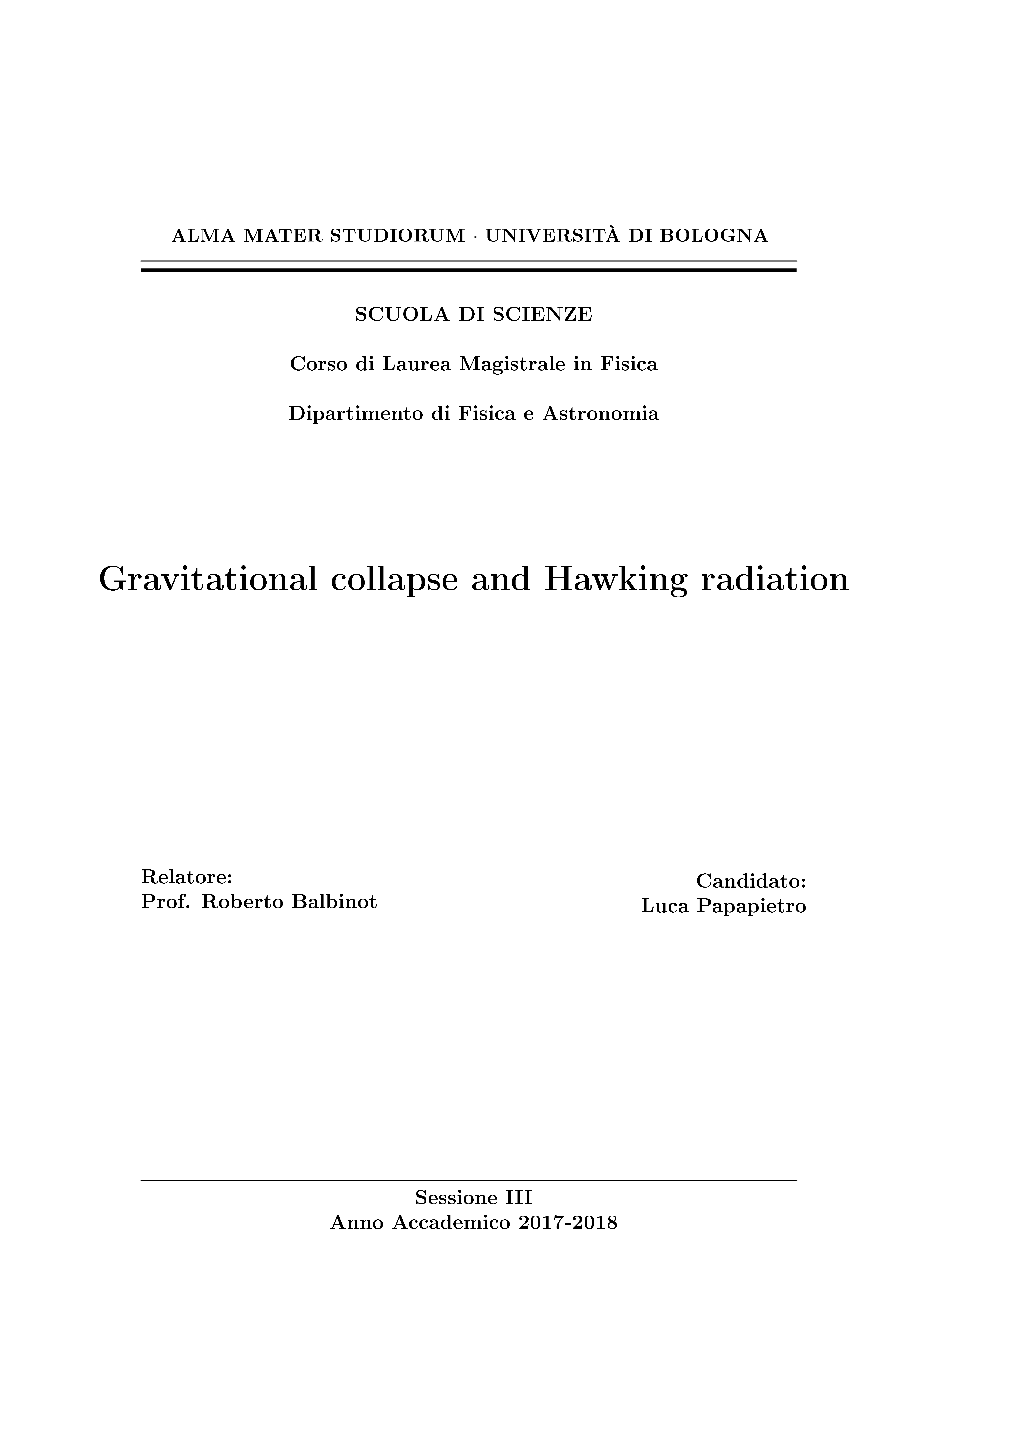 Gravitational Collapse and Hawking Radiation